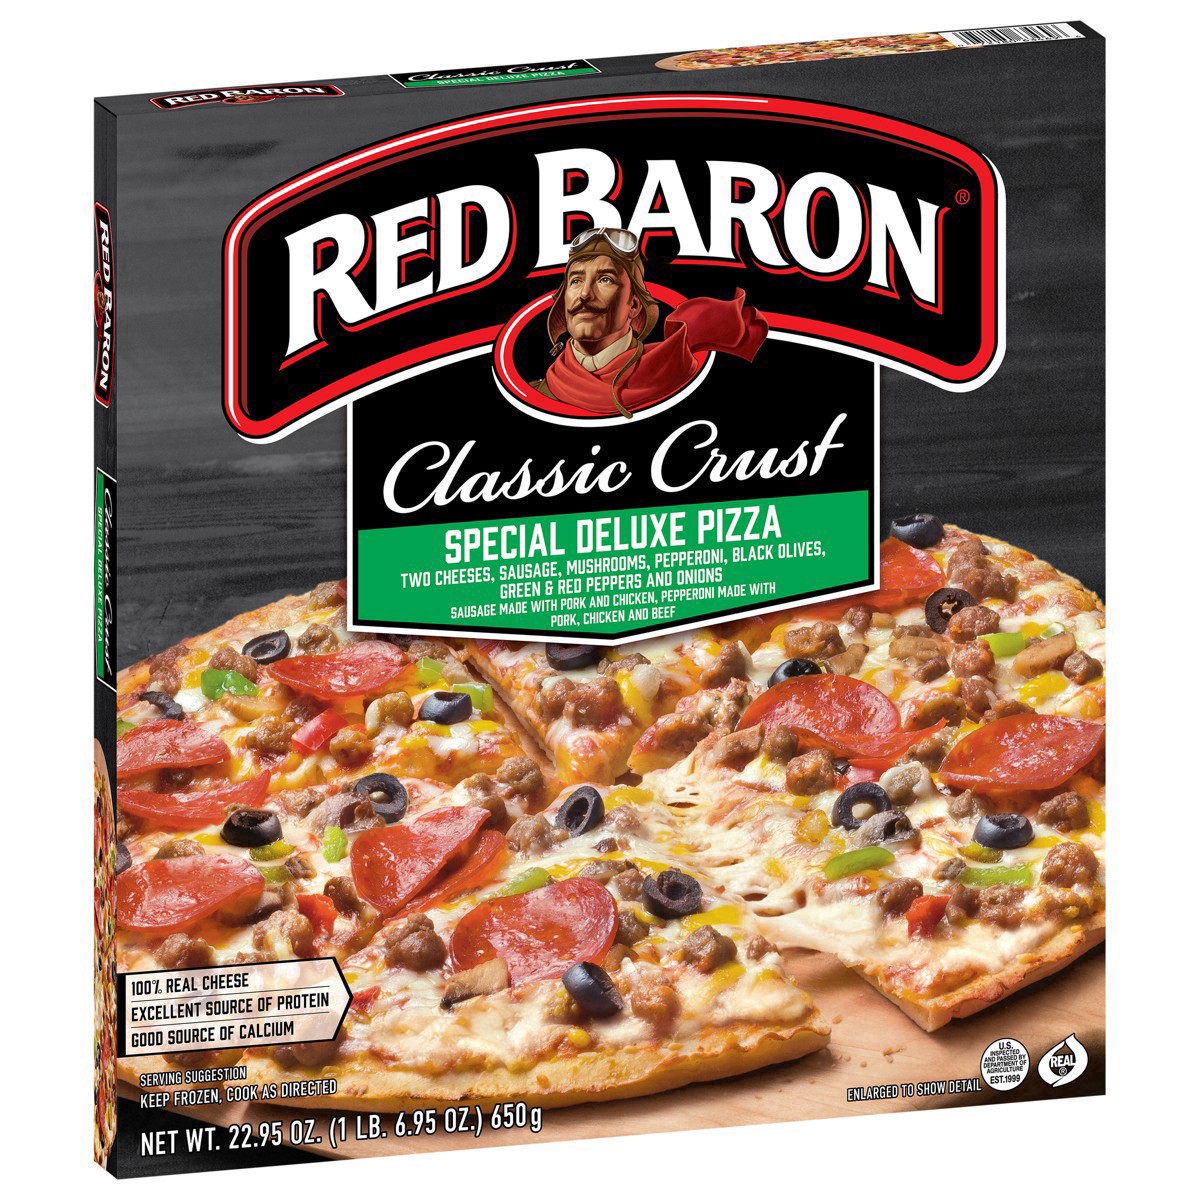 slide 41 of 89, Red Baron Frozen Pizza Classic Crust Special Deluxe, 1.43 lb